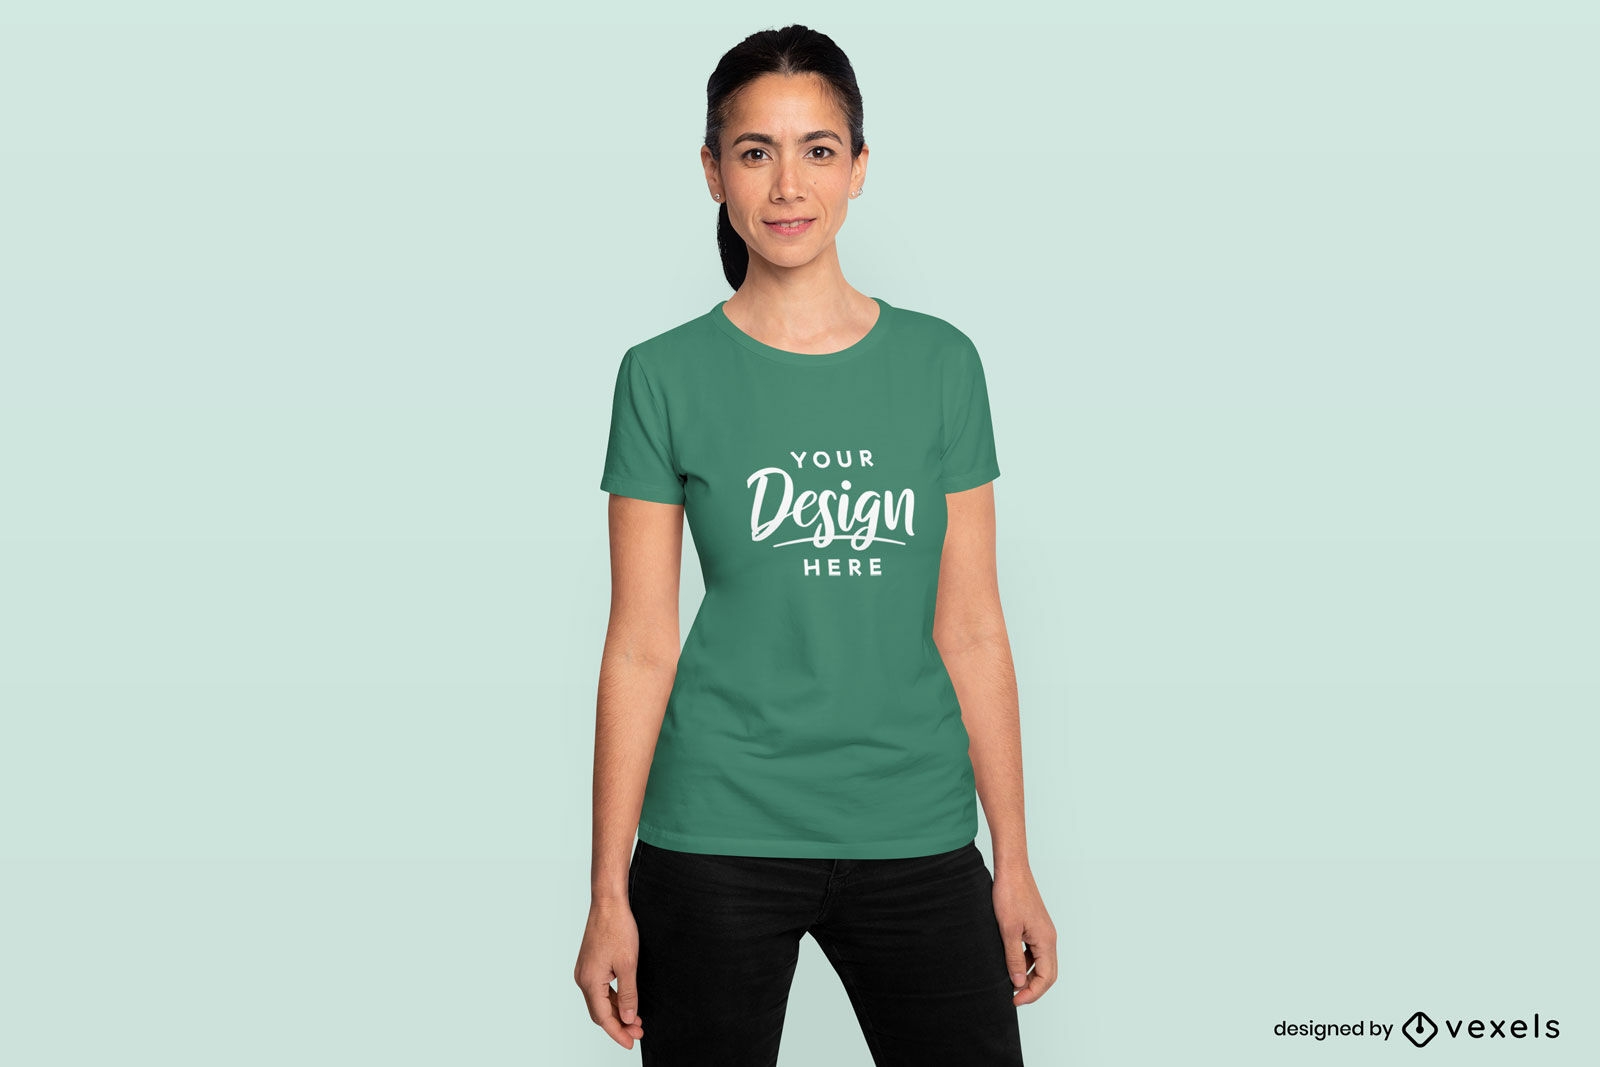 Female model with tight t-shirt mockup